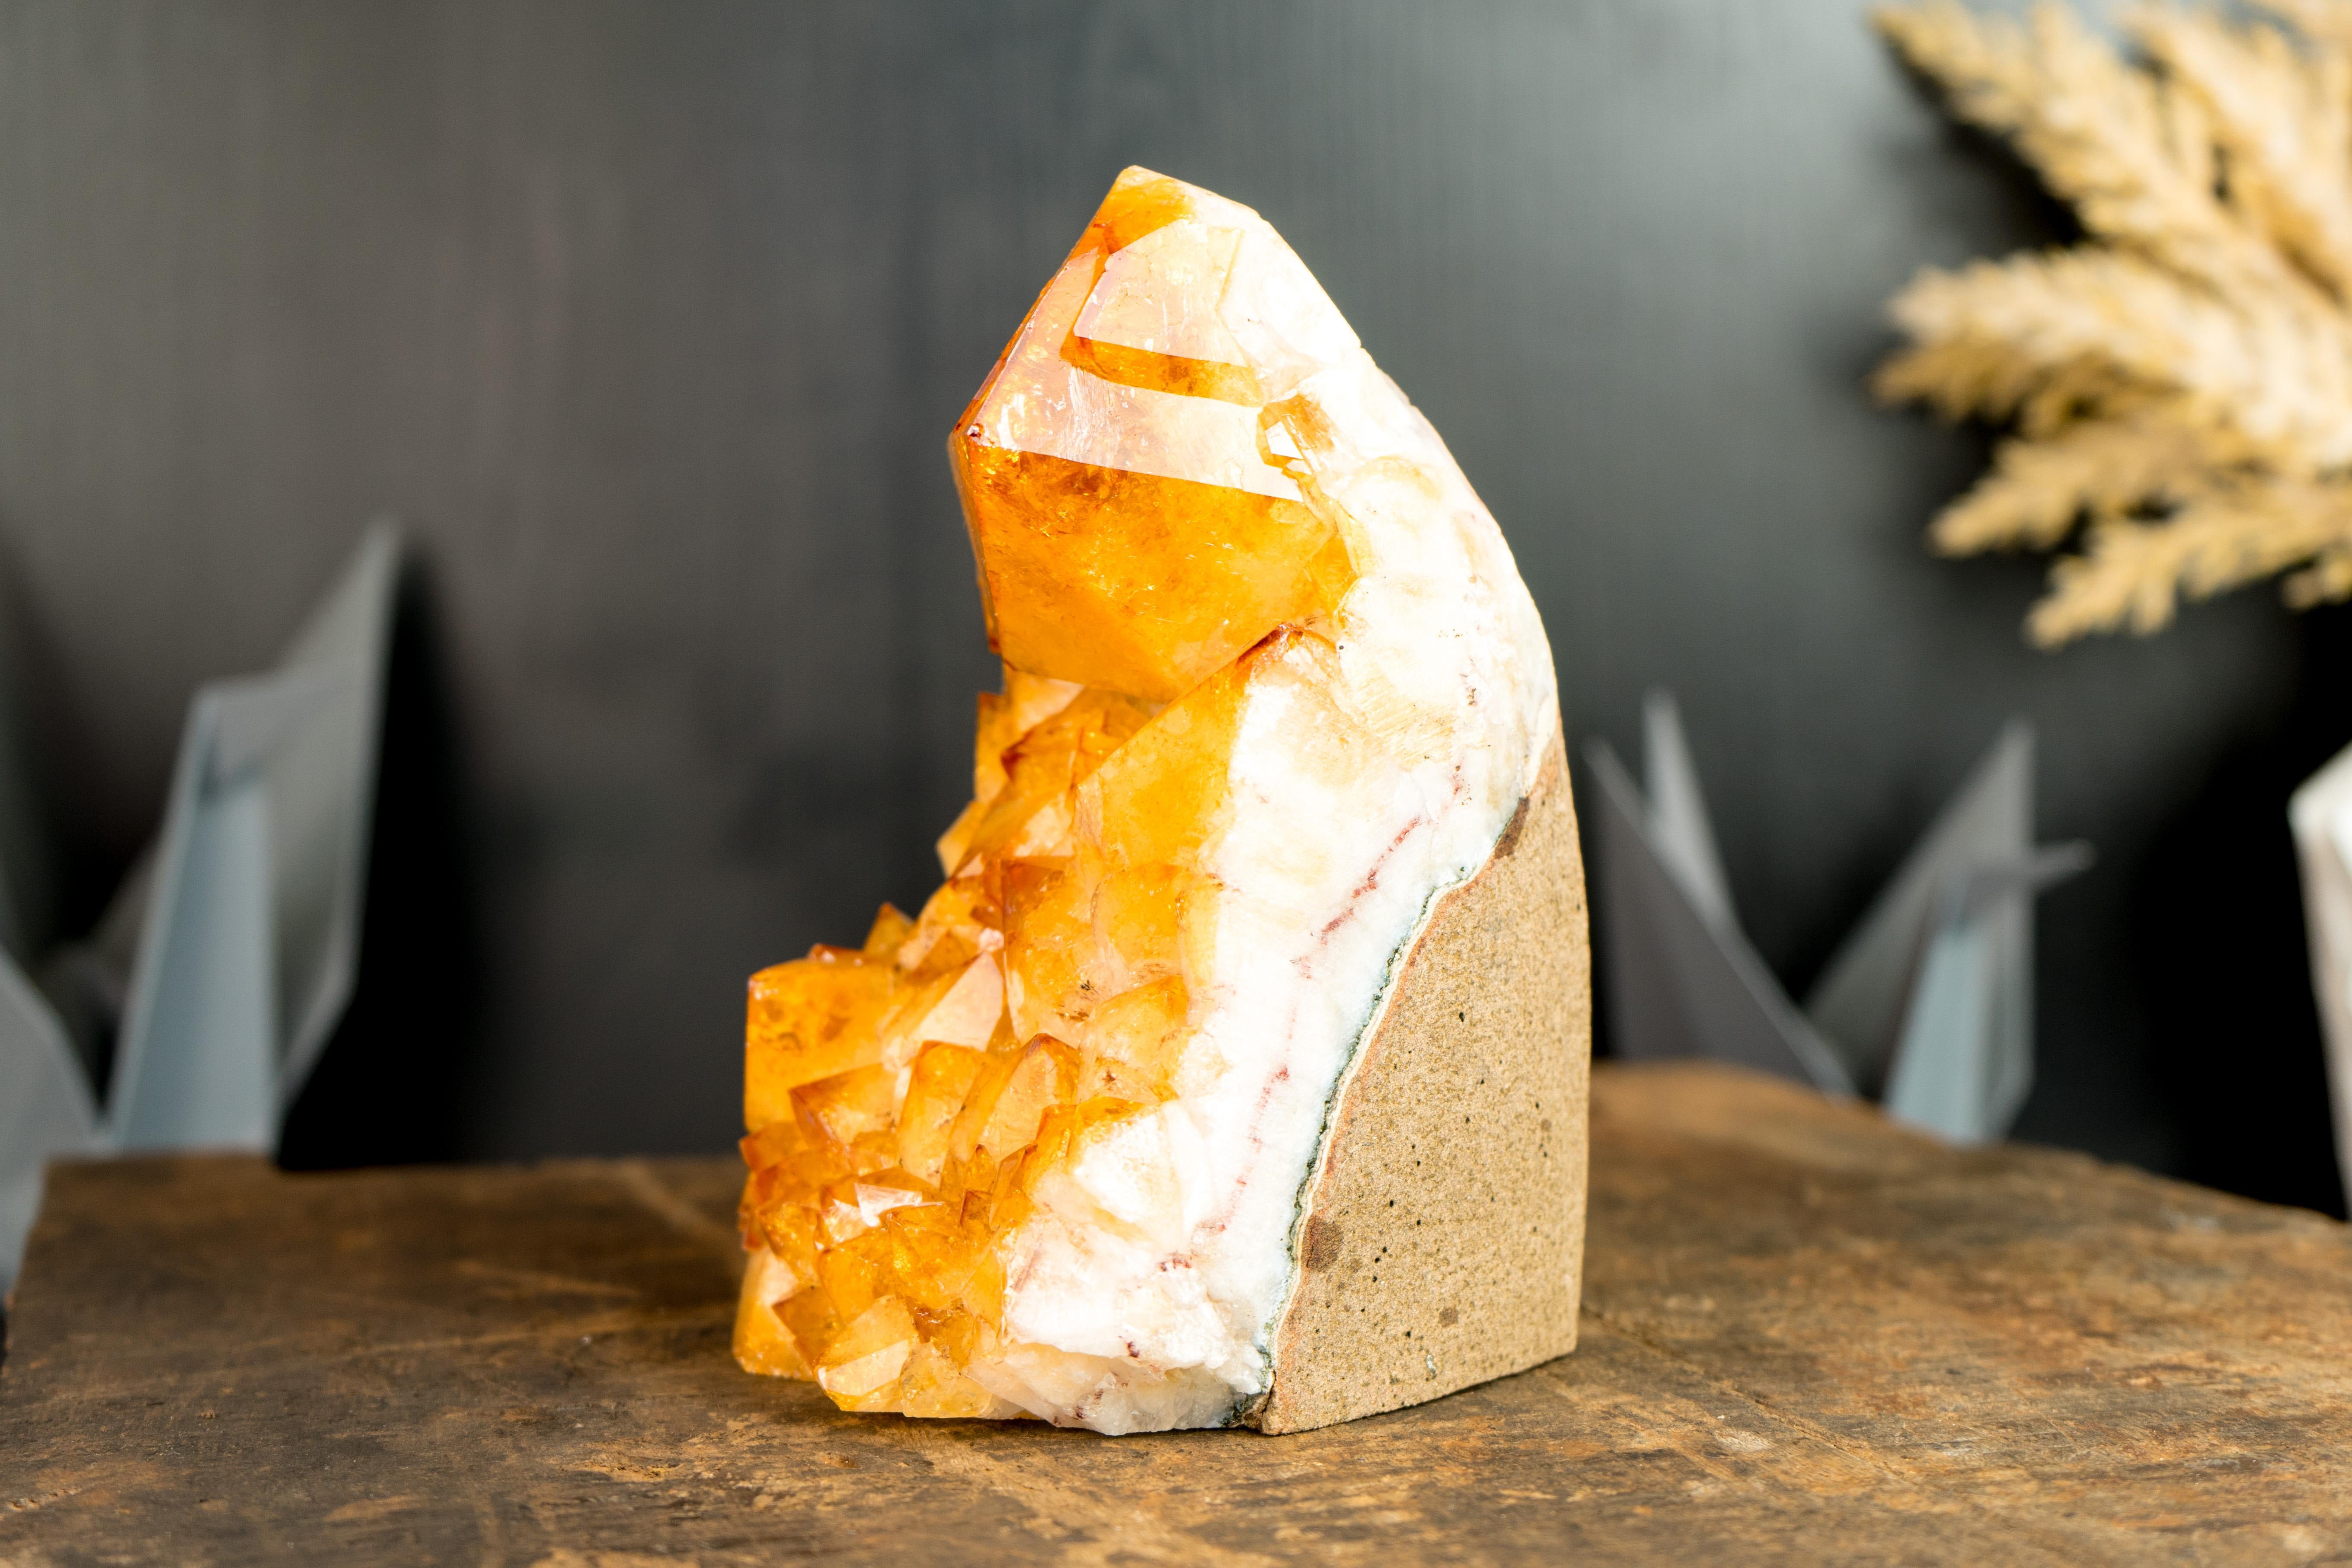 A Citrine Cluster that brings a rarely seen large Point that adds to the gorgeous aesthetics of the specimen, this citrine is ready to be a focal point in your collection as well as an energetic accent in your room.

The citrine druzy is the main